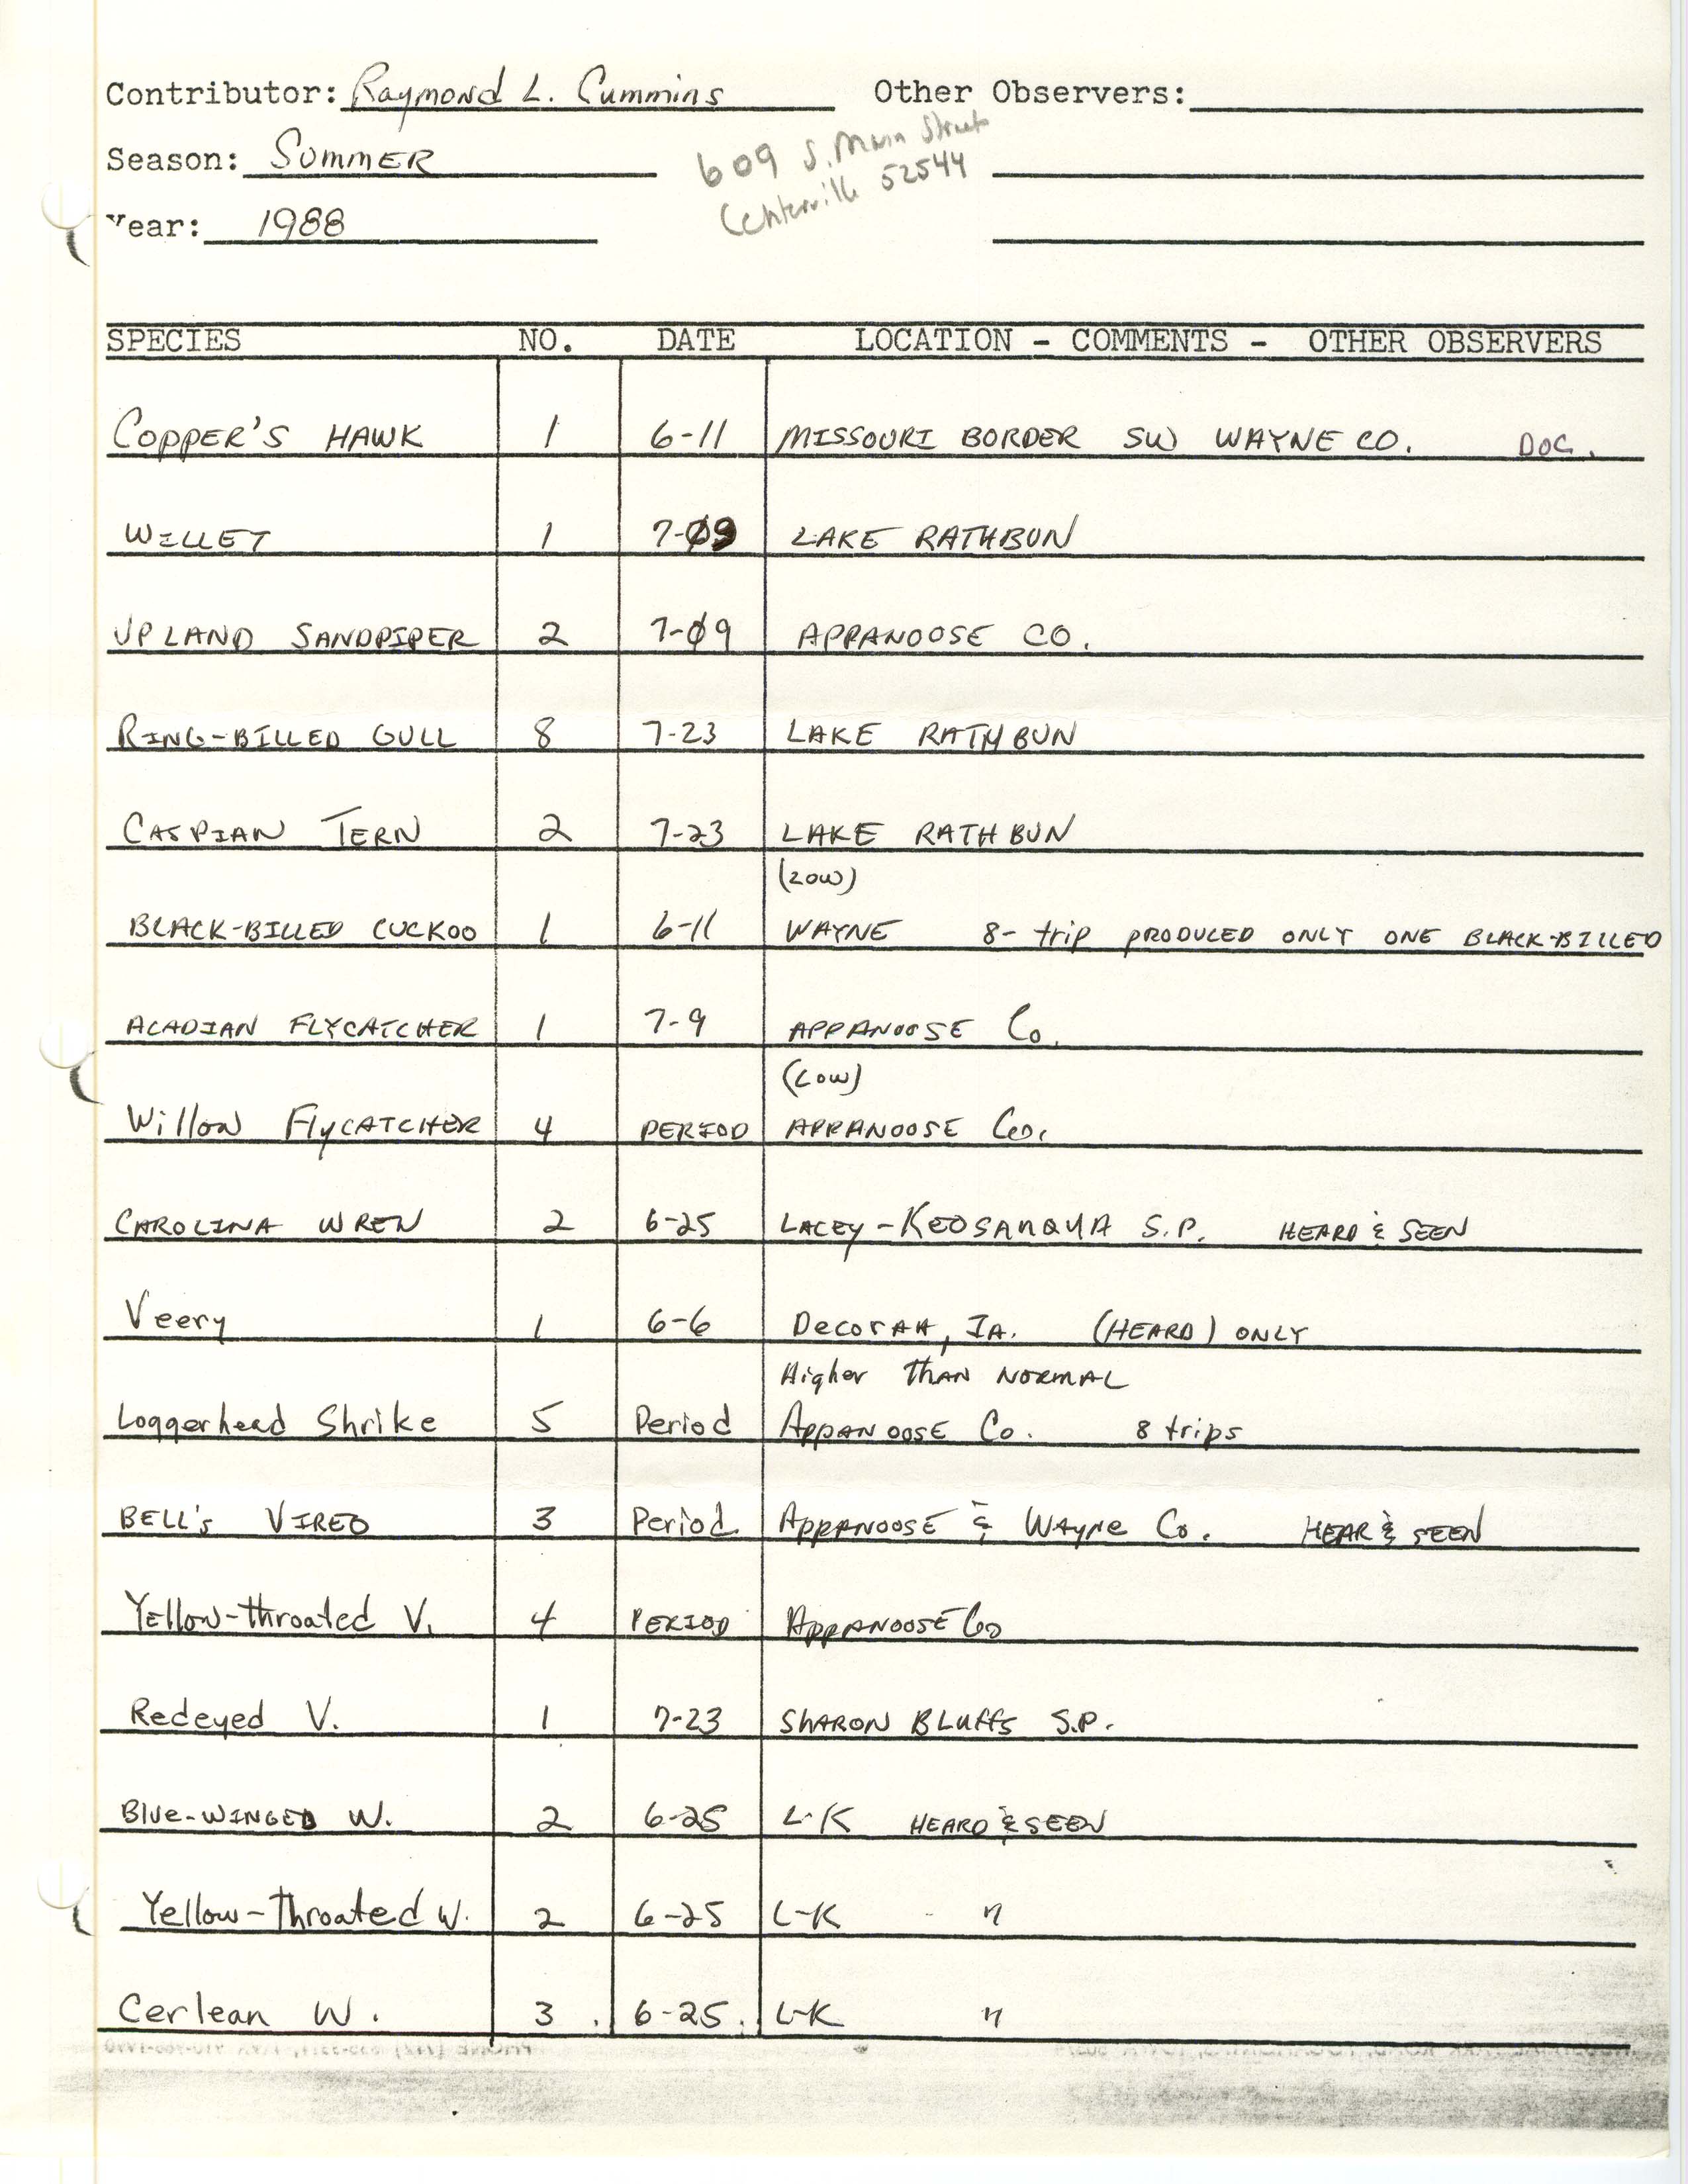 Field notes contributed by Raymond L. Cummins, summer 1988